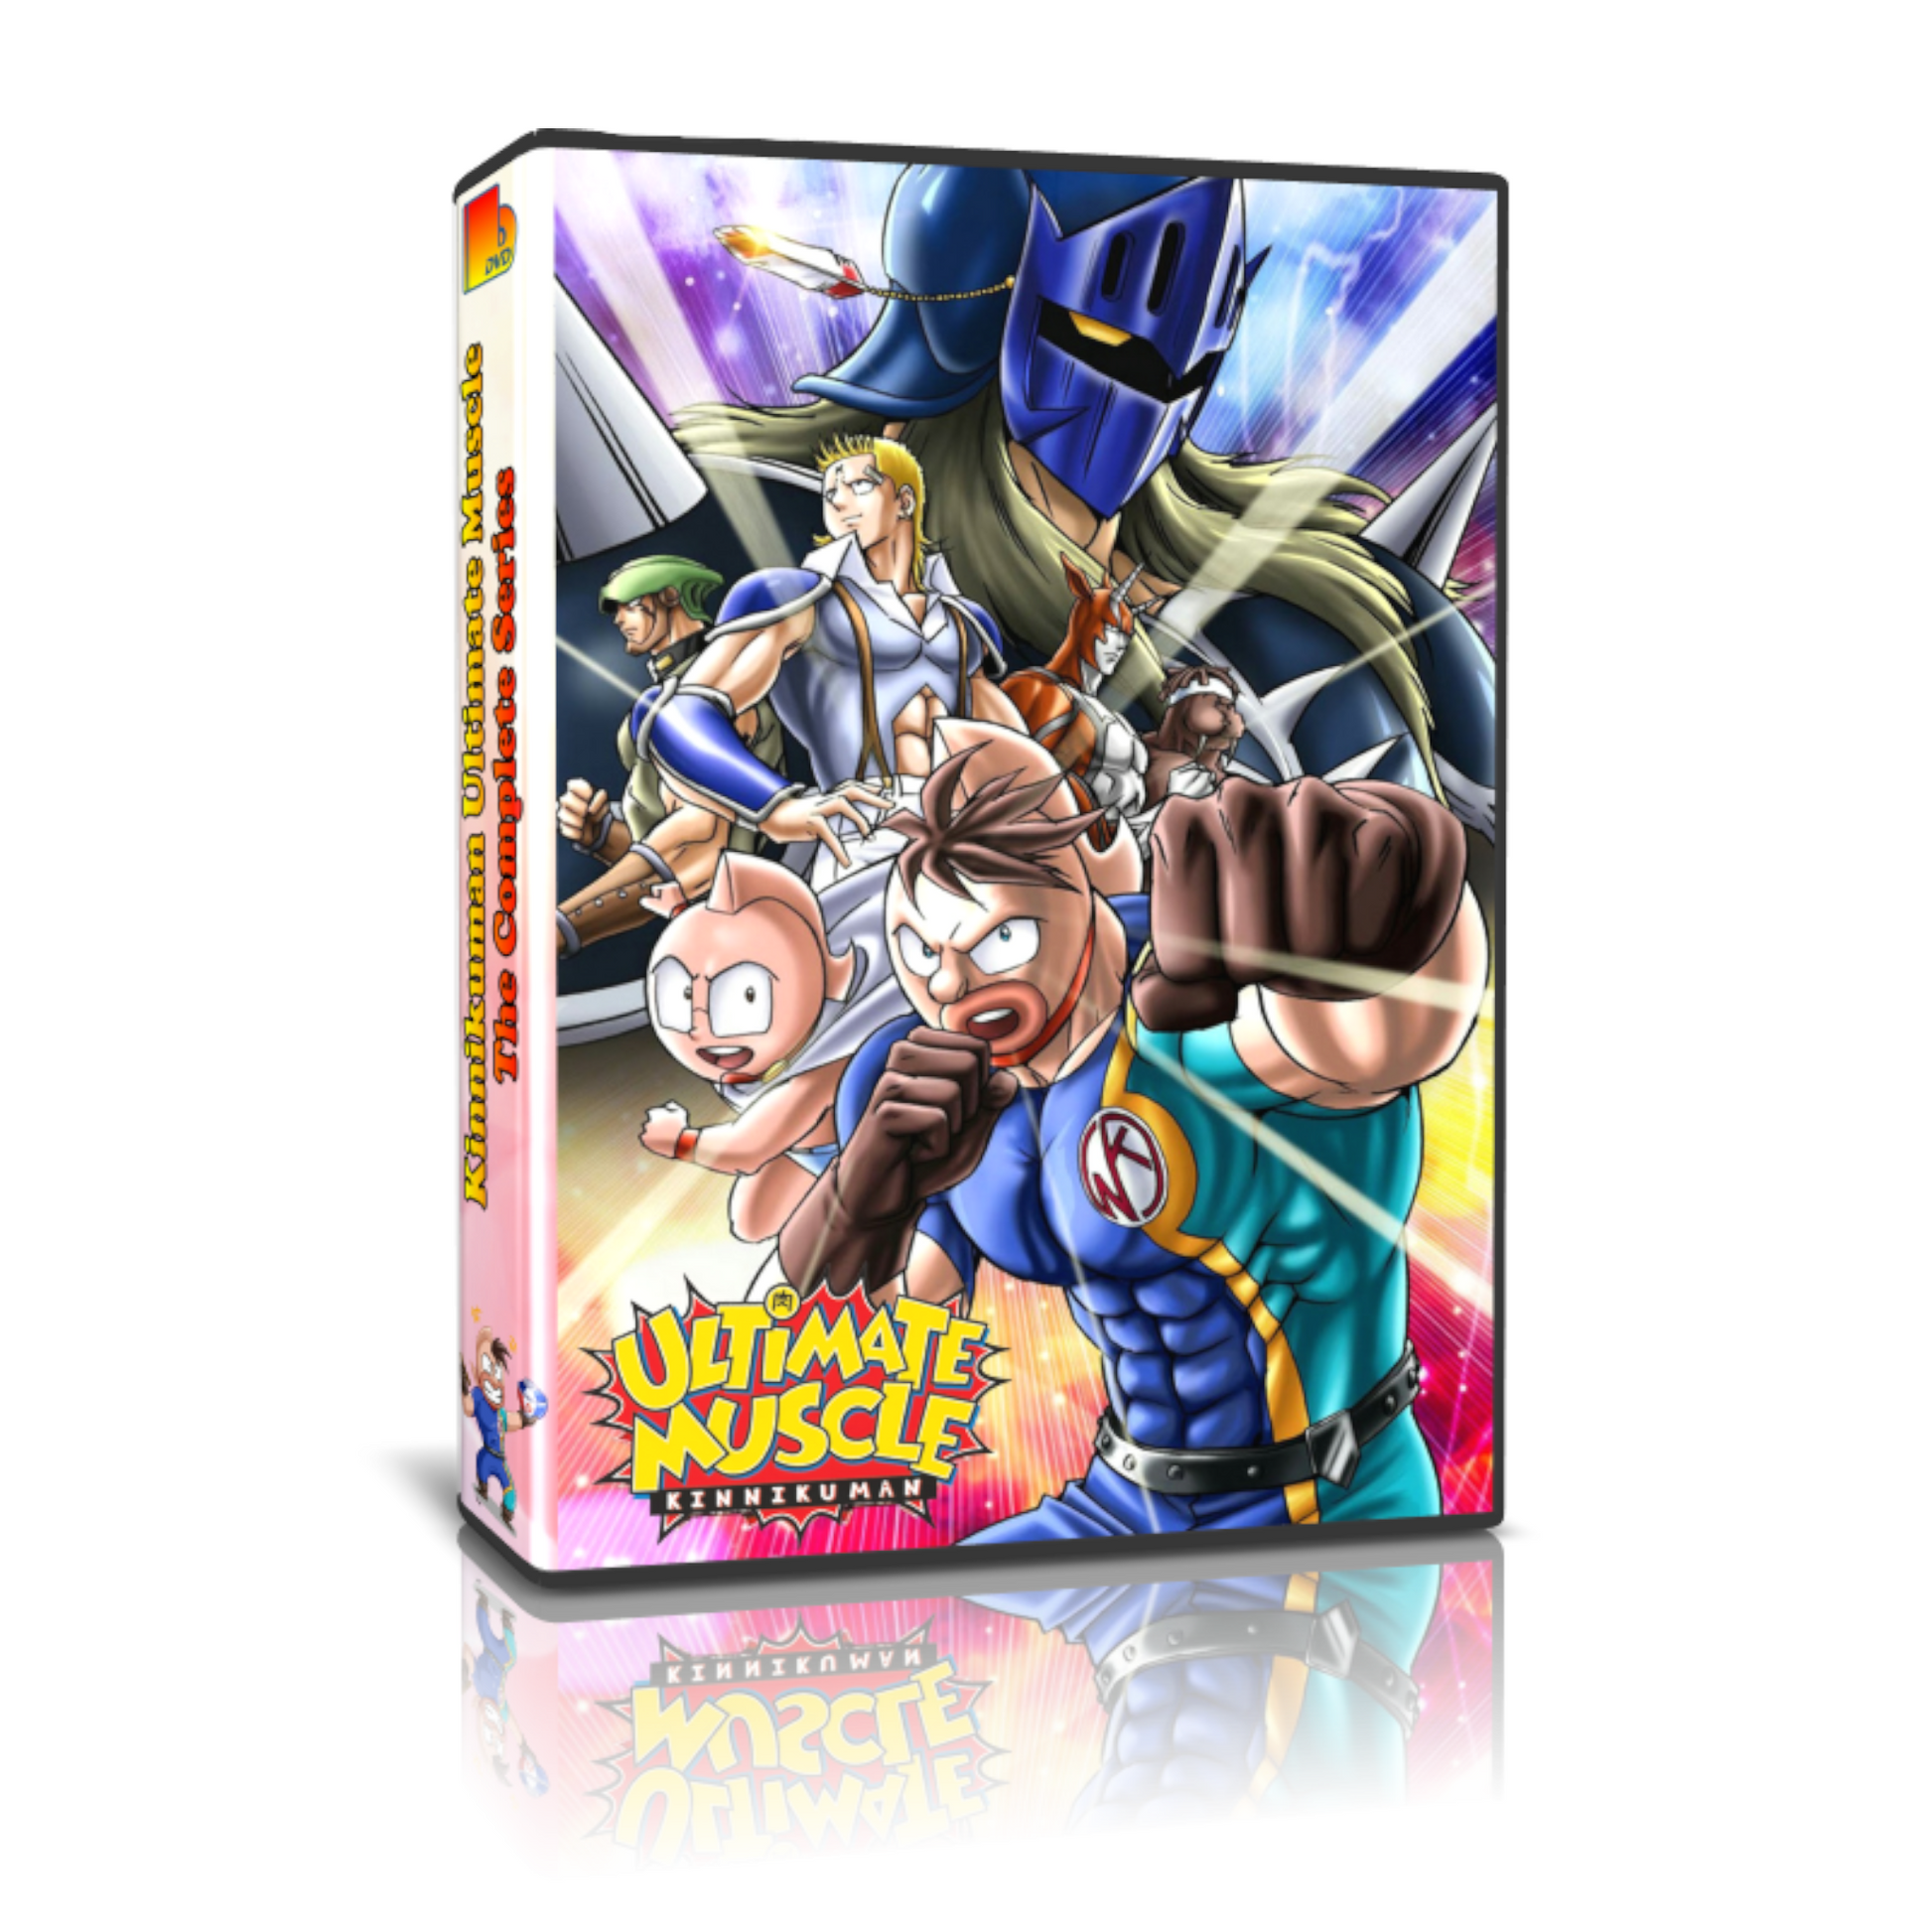 Ultimate Muscle English Dub Complete Series DVD Set - RetroAnimation 